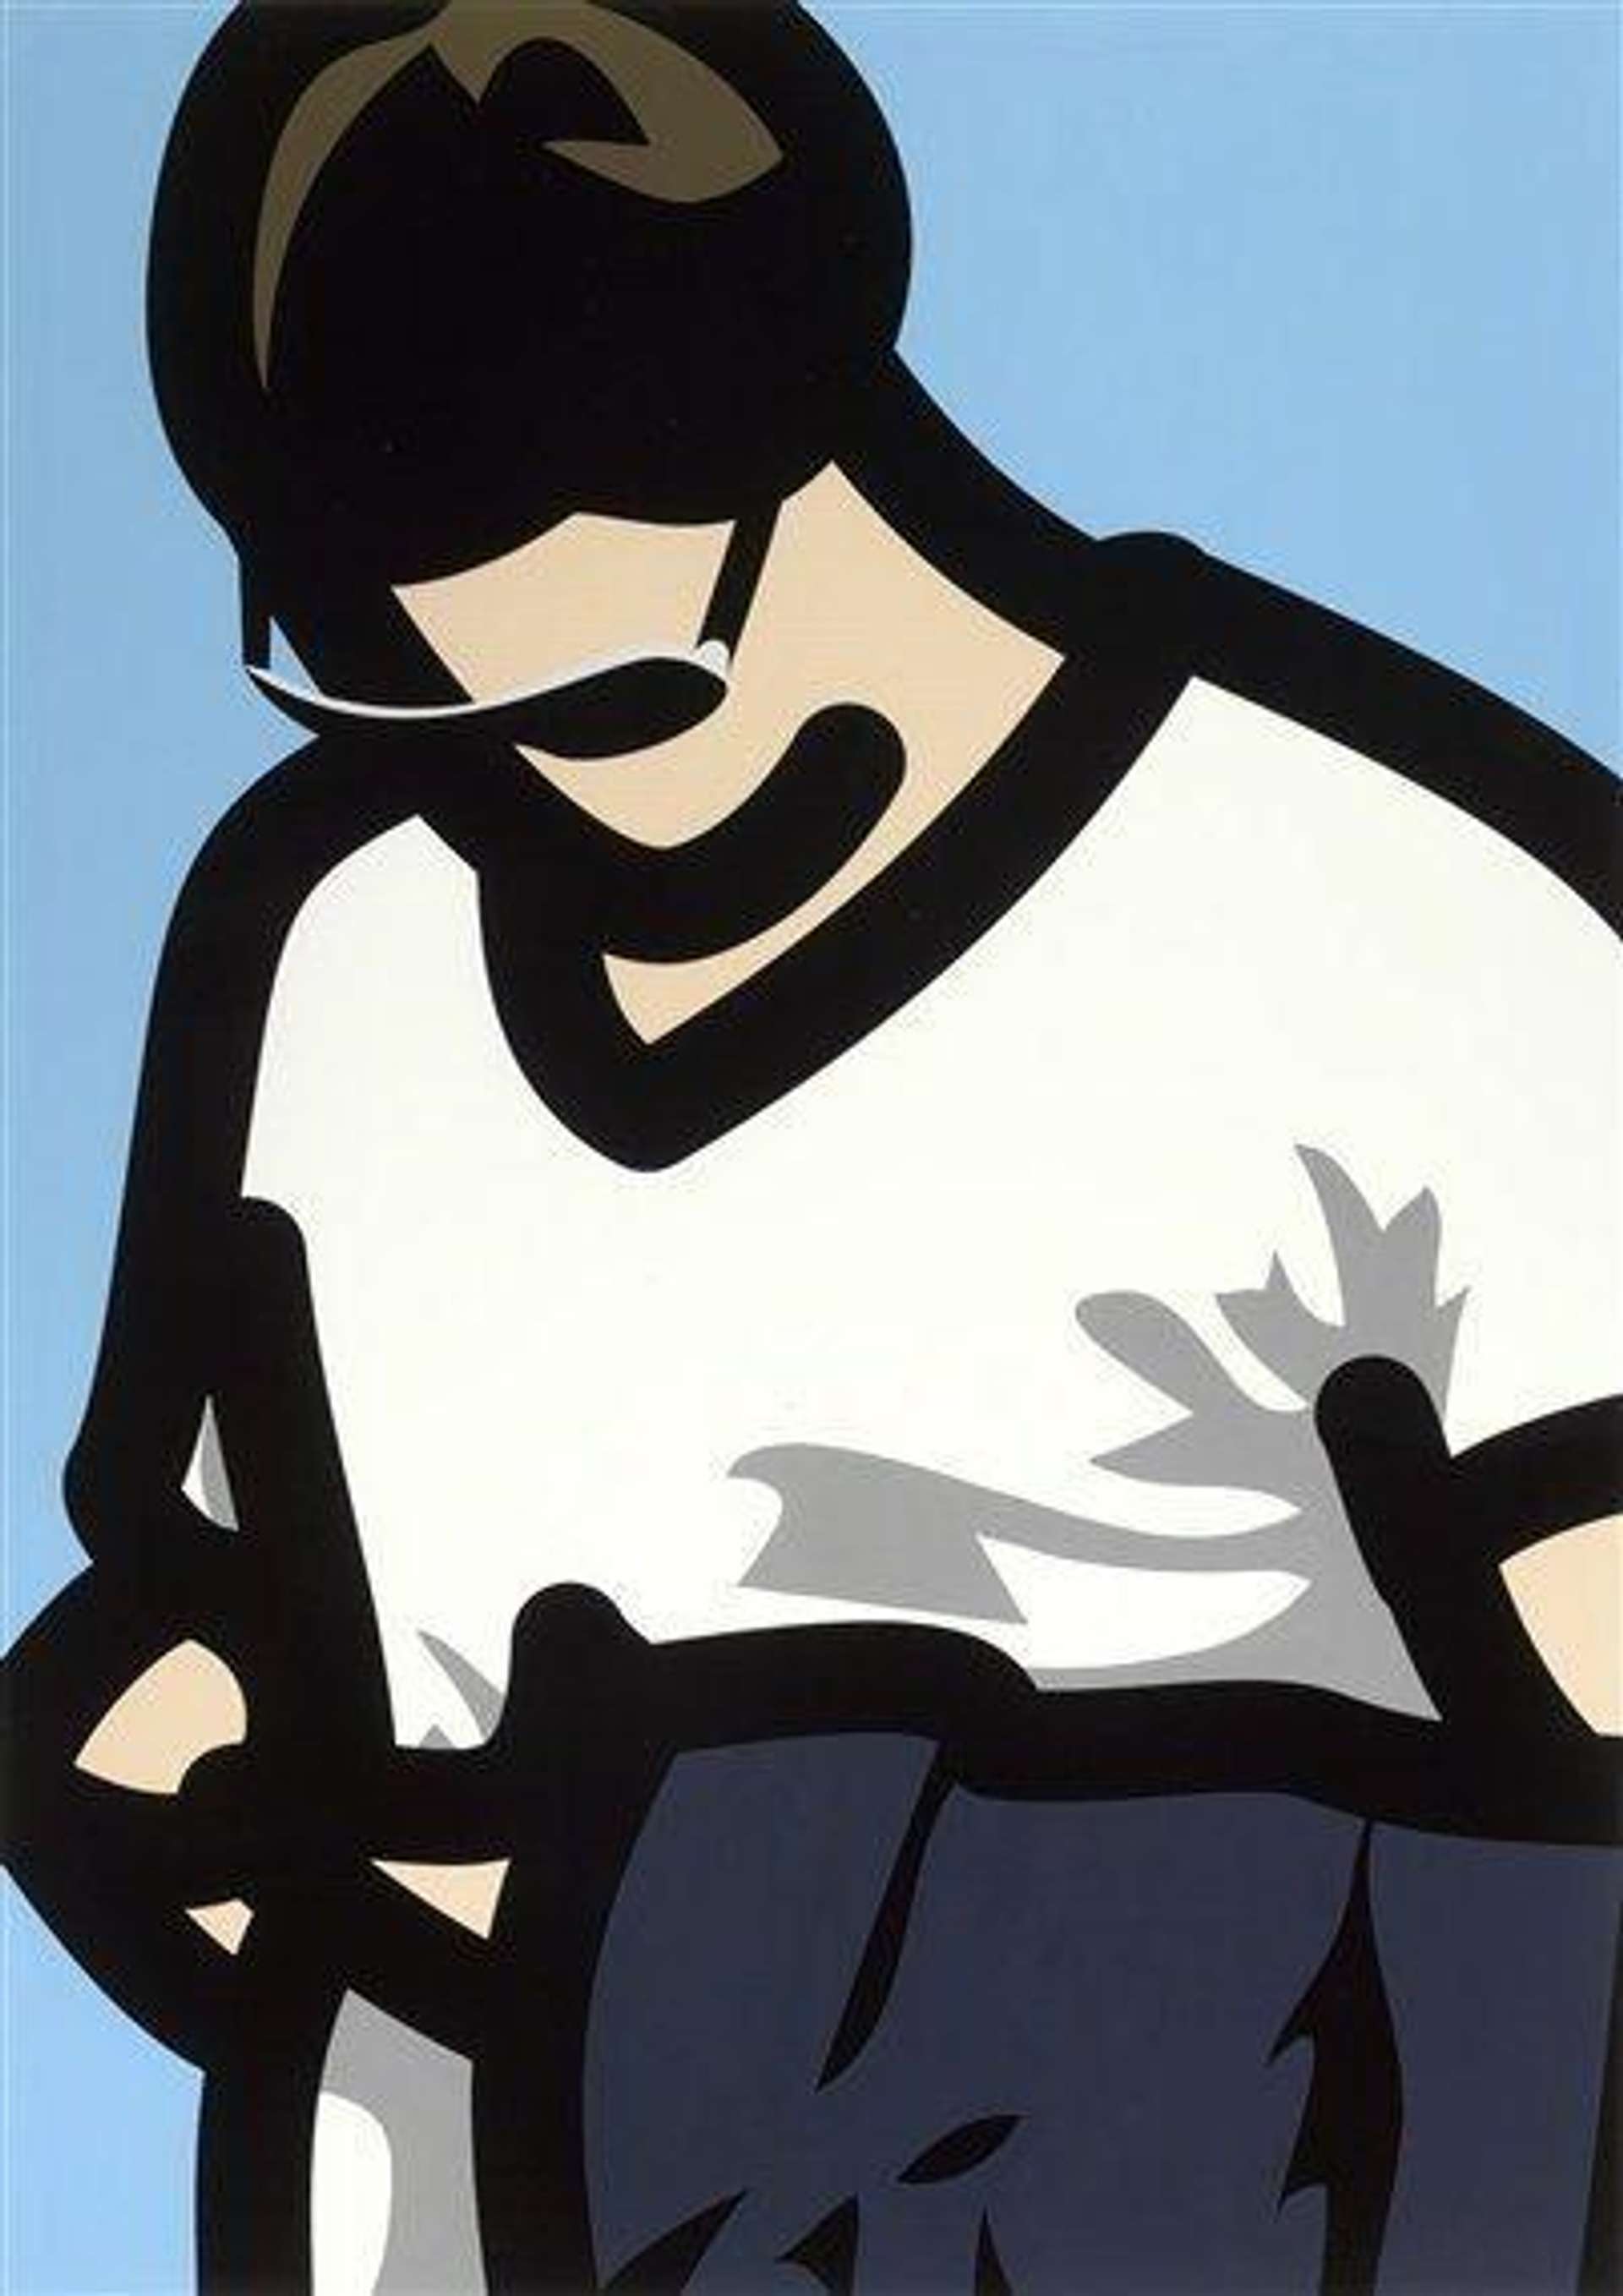 Julian Opie: Tourist With Phone - Signed Print